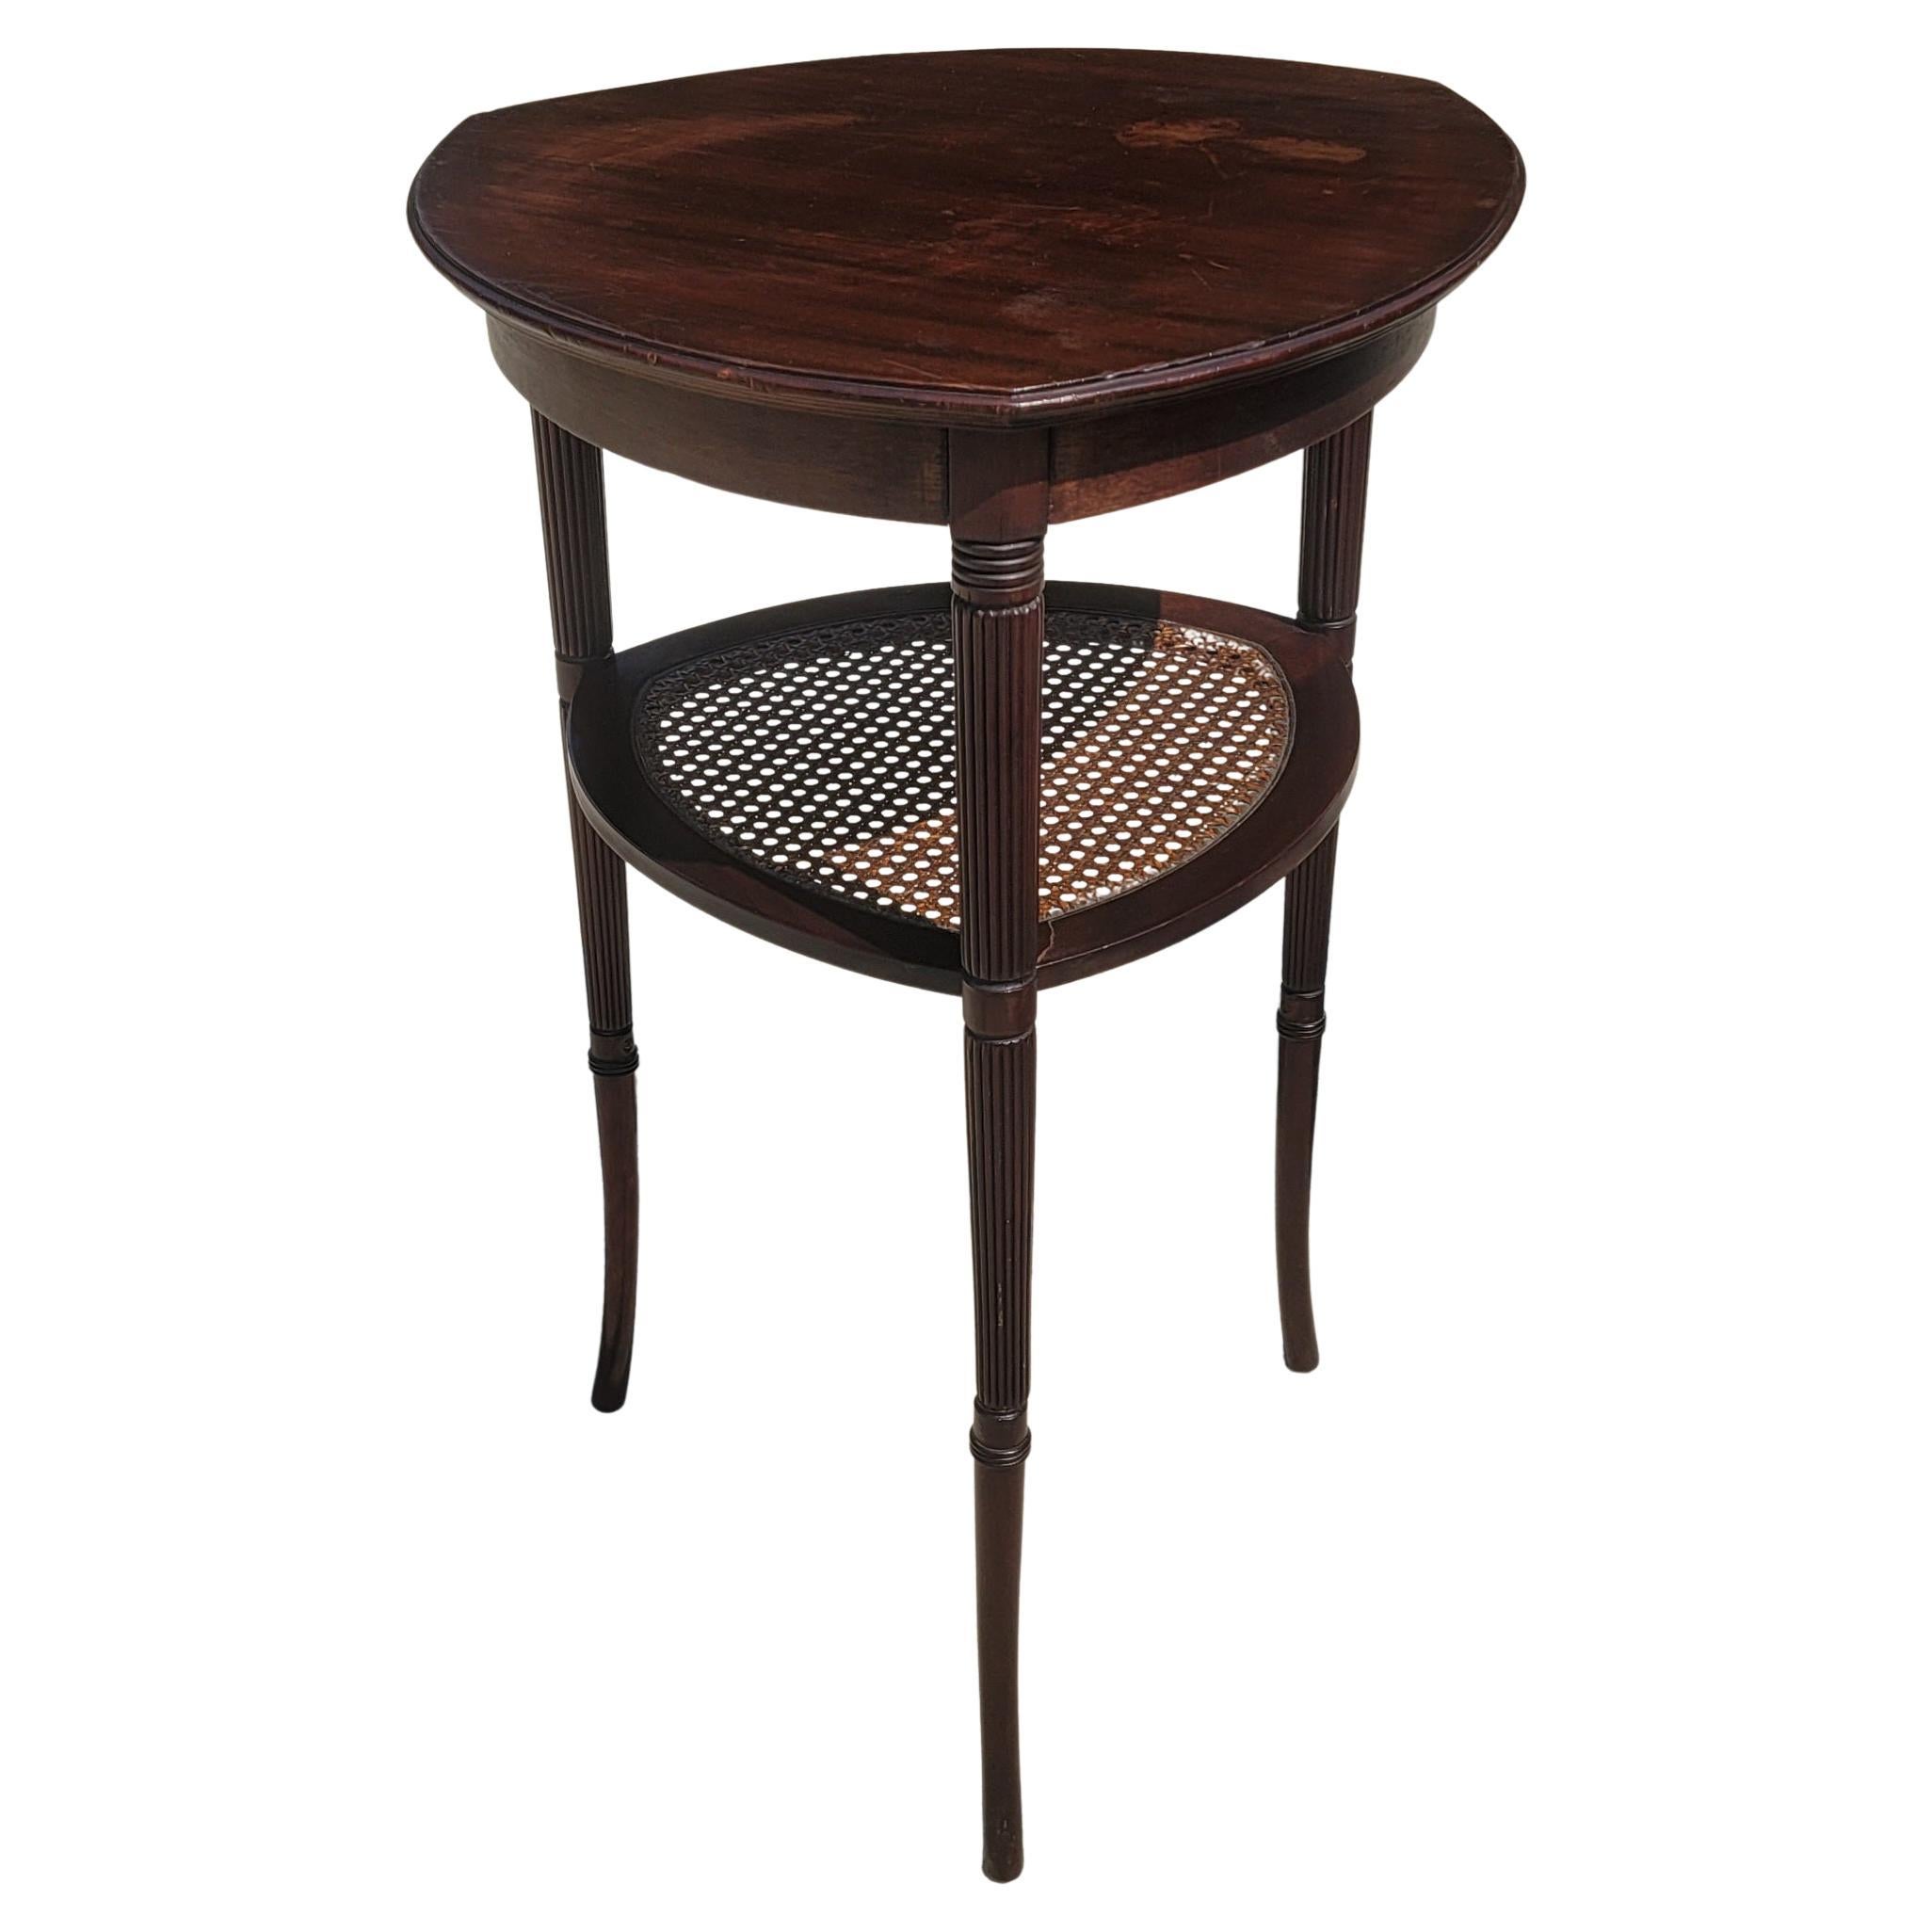 1940s Vintage Triangular Two-Tier Mahogany and Cane Side Table Candle Stand For Sale